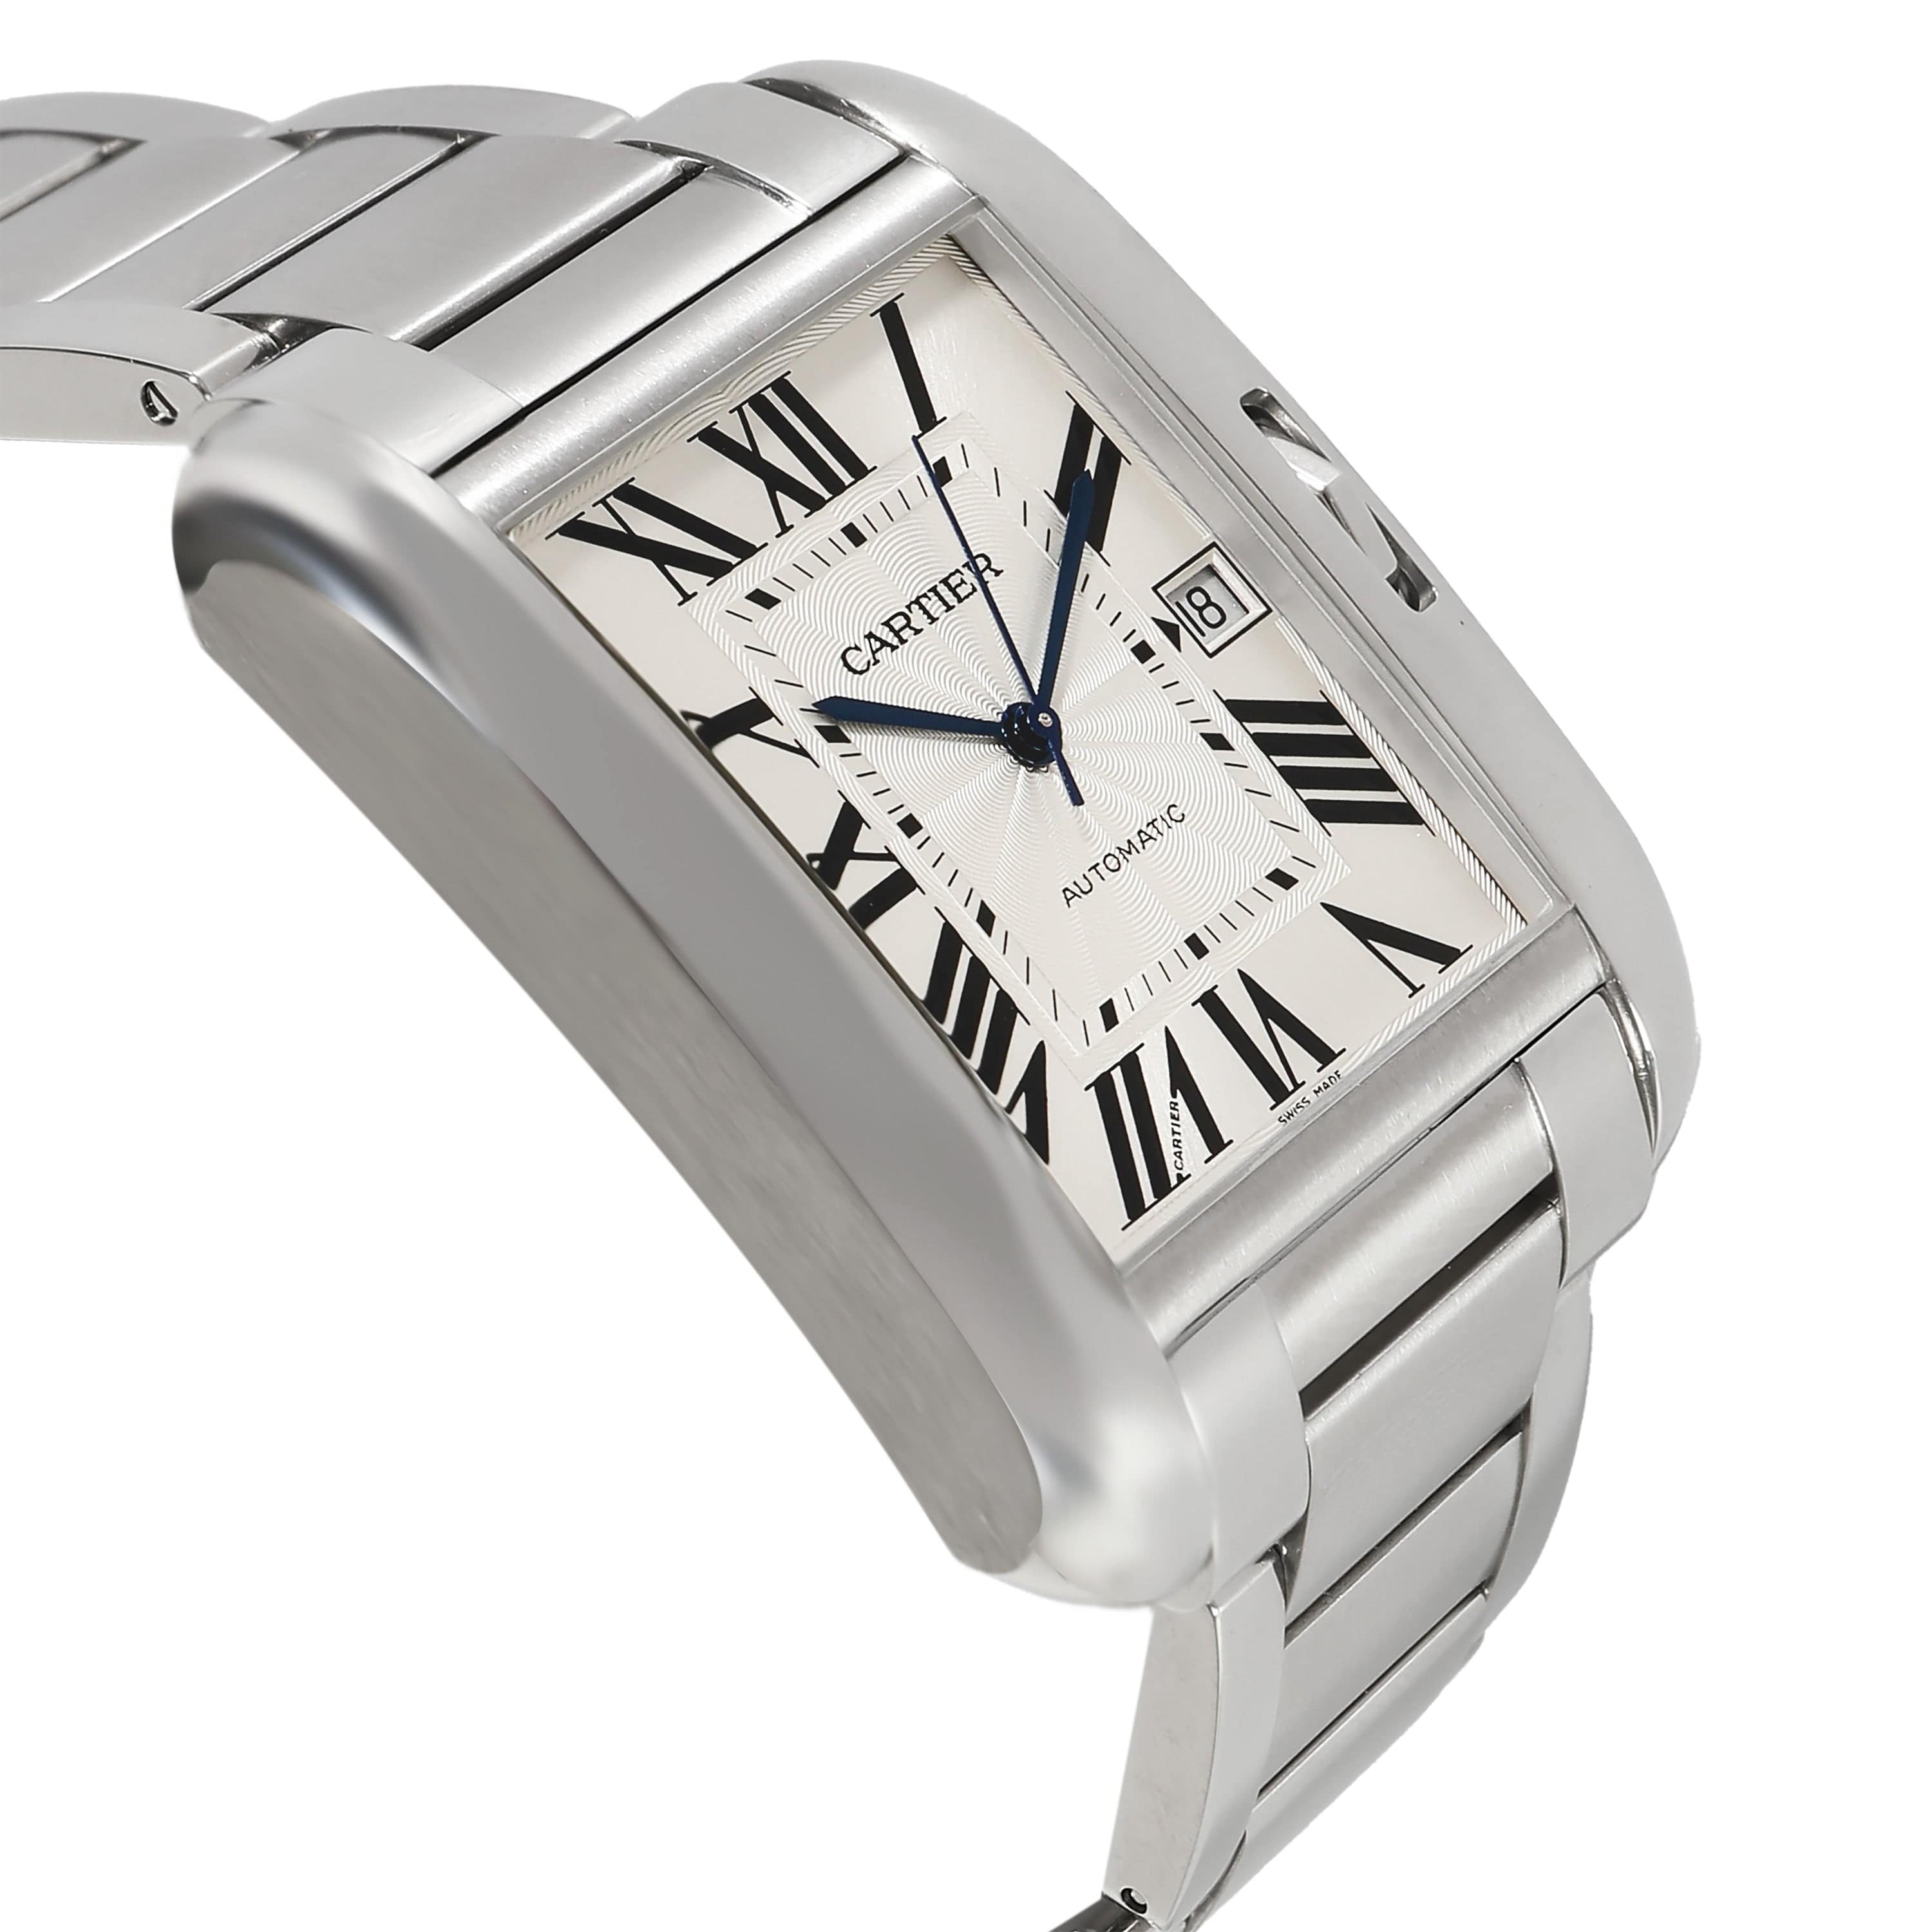 Cartier Cartier Tank Anglaise W5310008 Men's Watch in  Stainless Steel